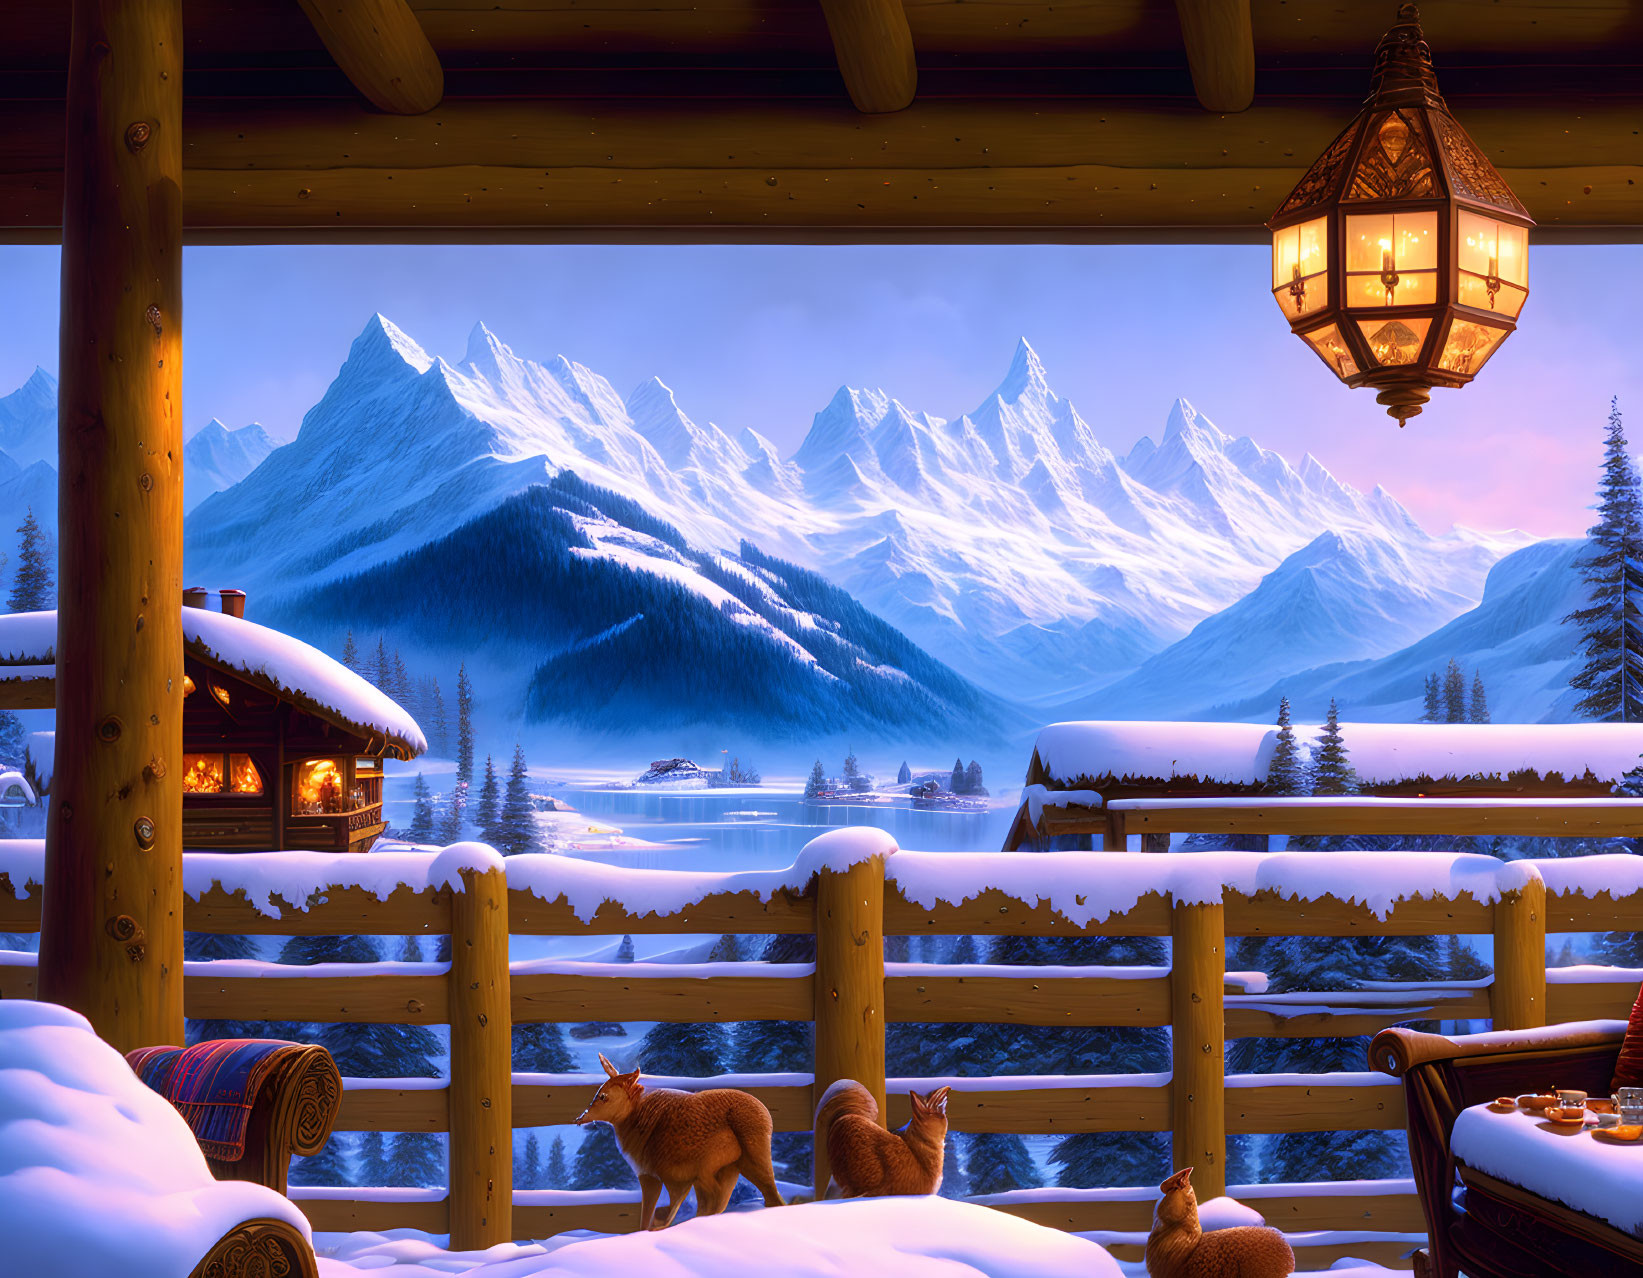 Snowy mountain cabin view with lantern, foxes, and lake